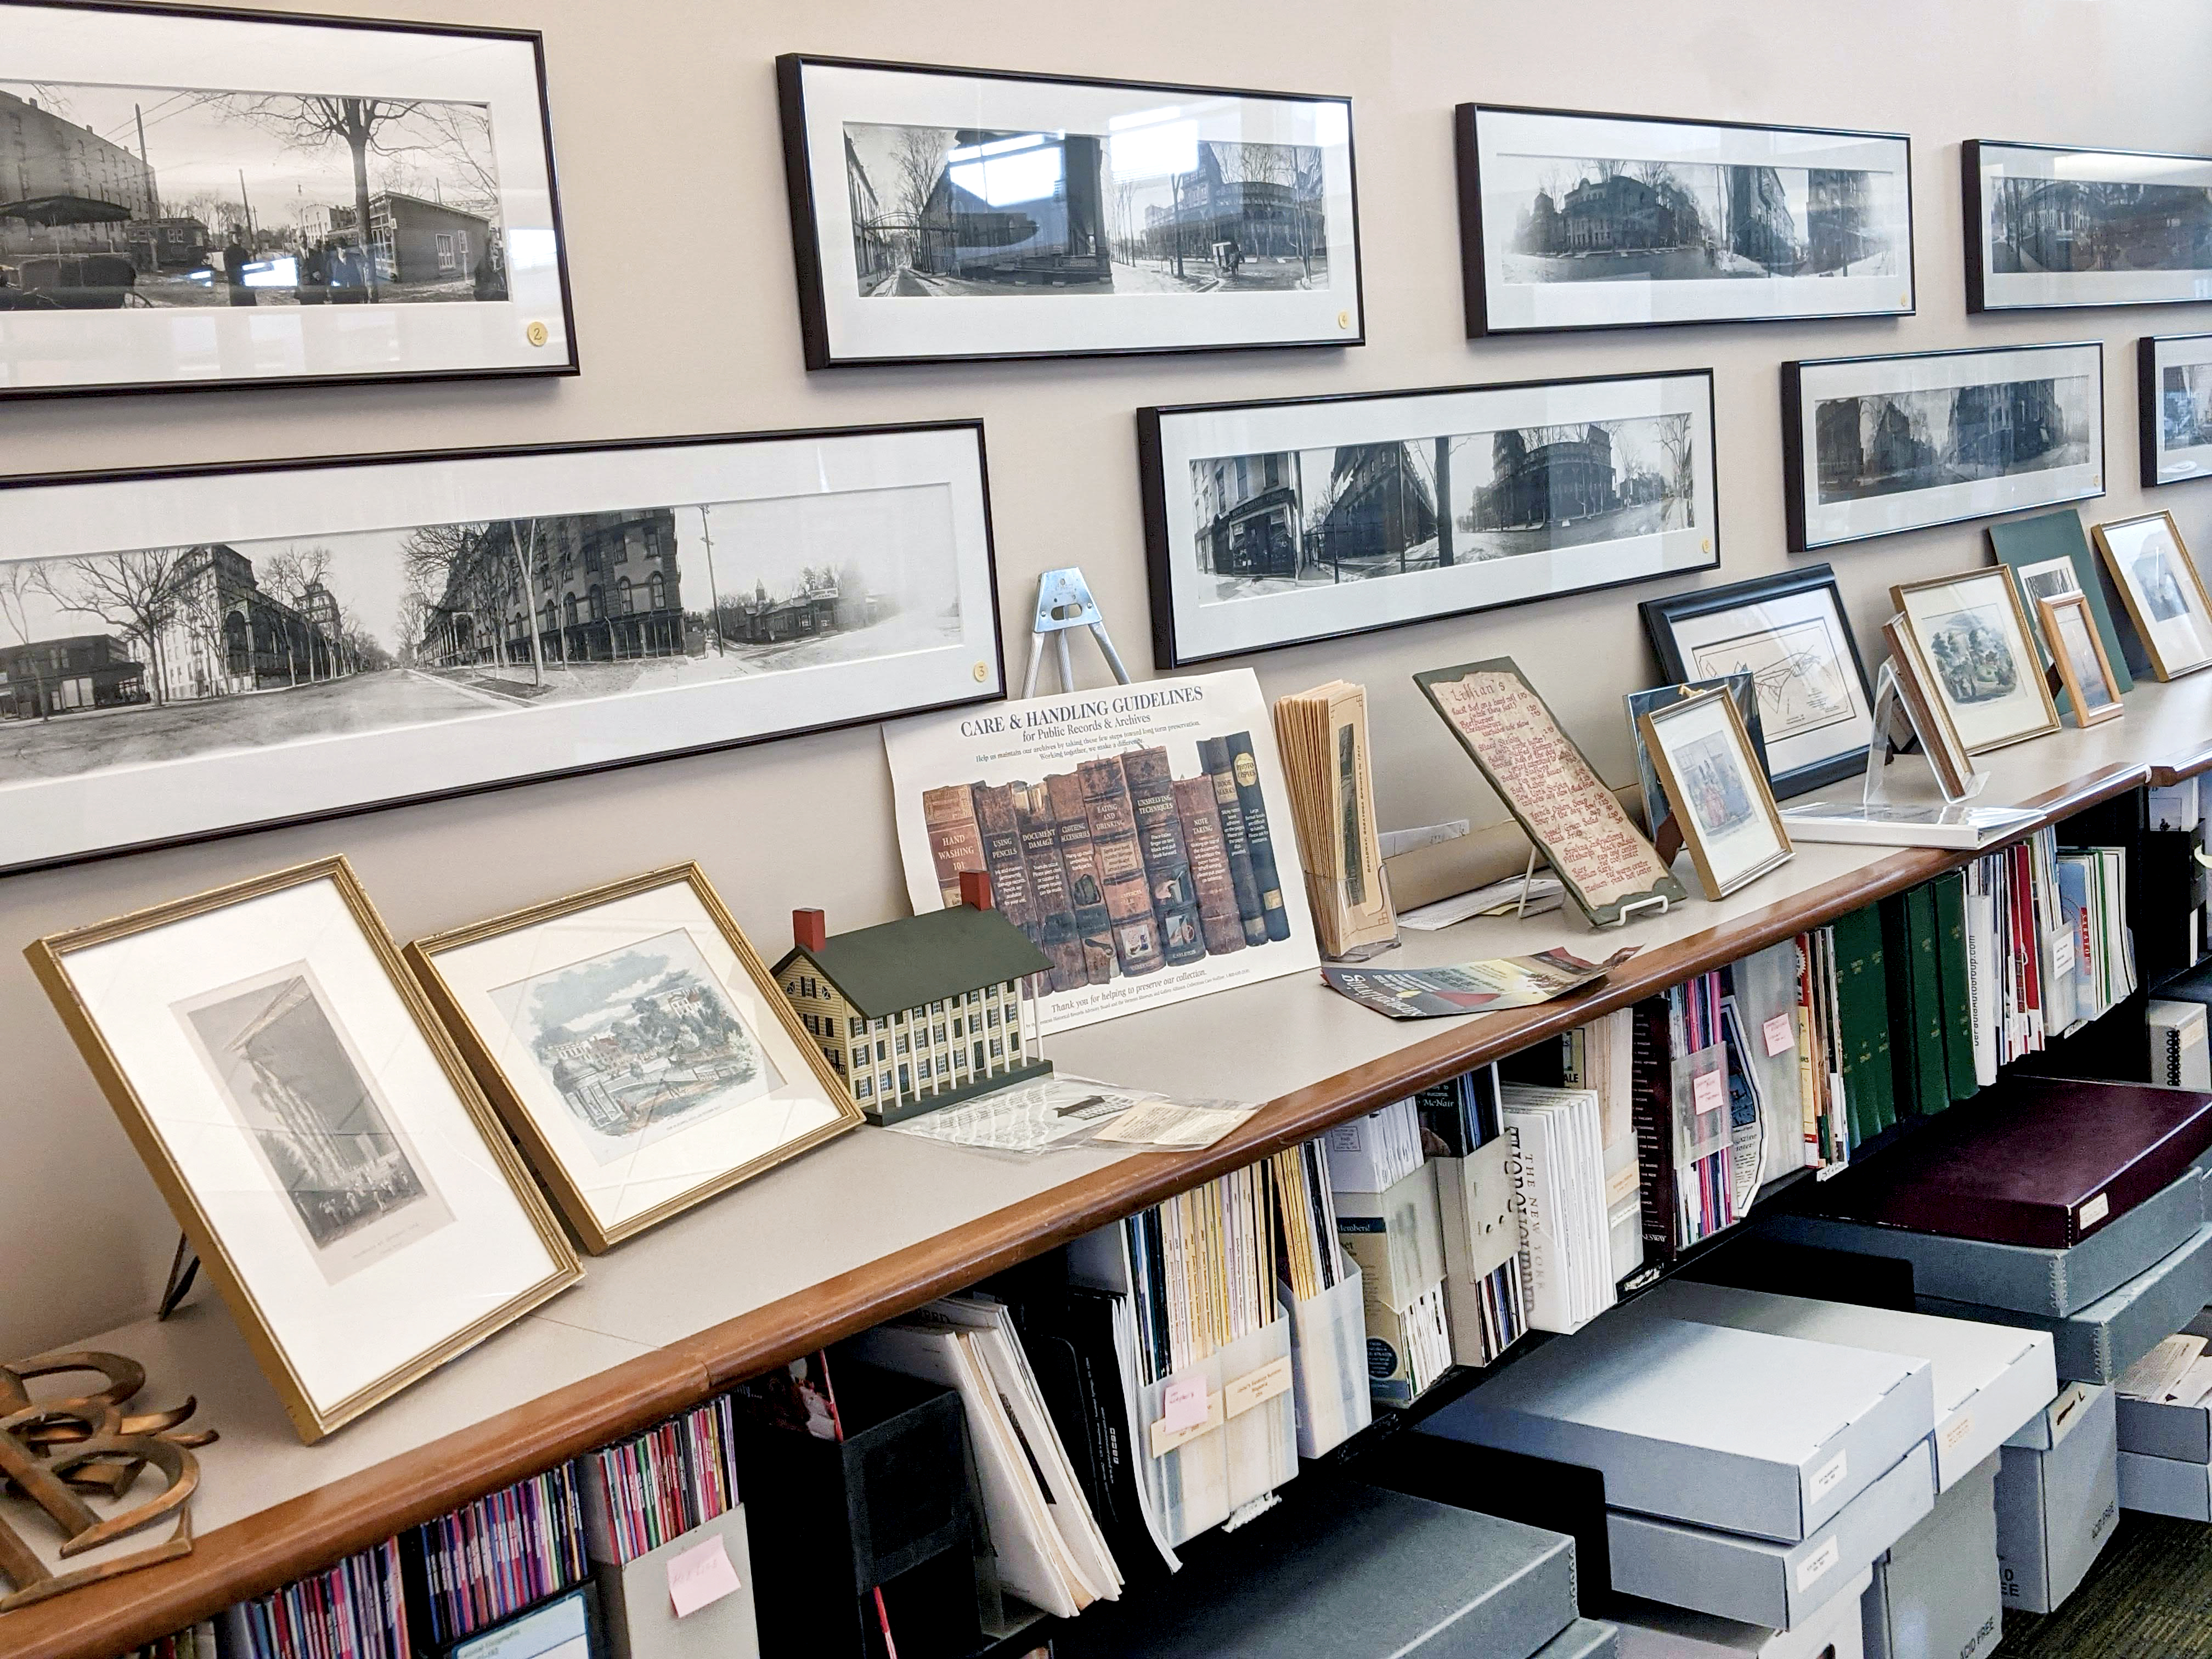 Material on a back shelf along a wall, with very early panoramic photographic prints of the Saratoga Springs area.